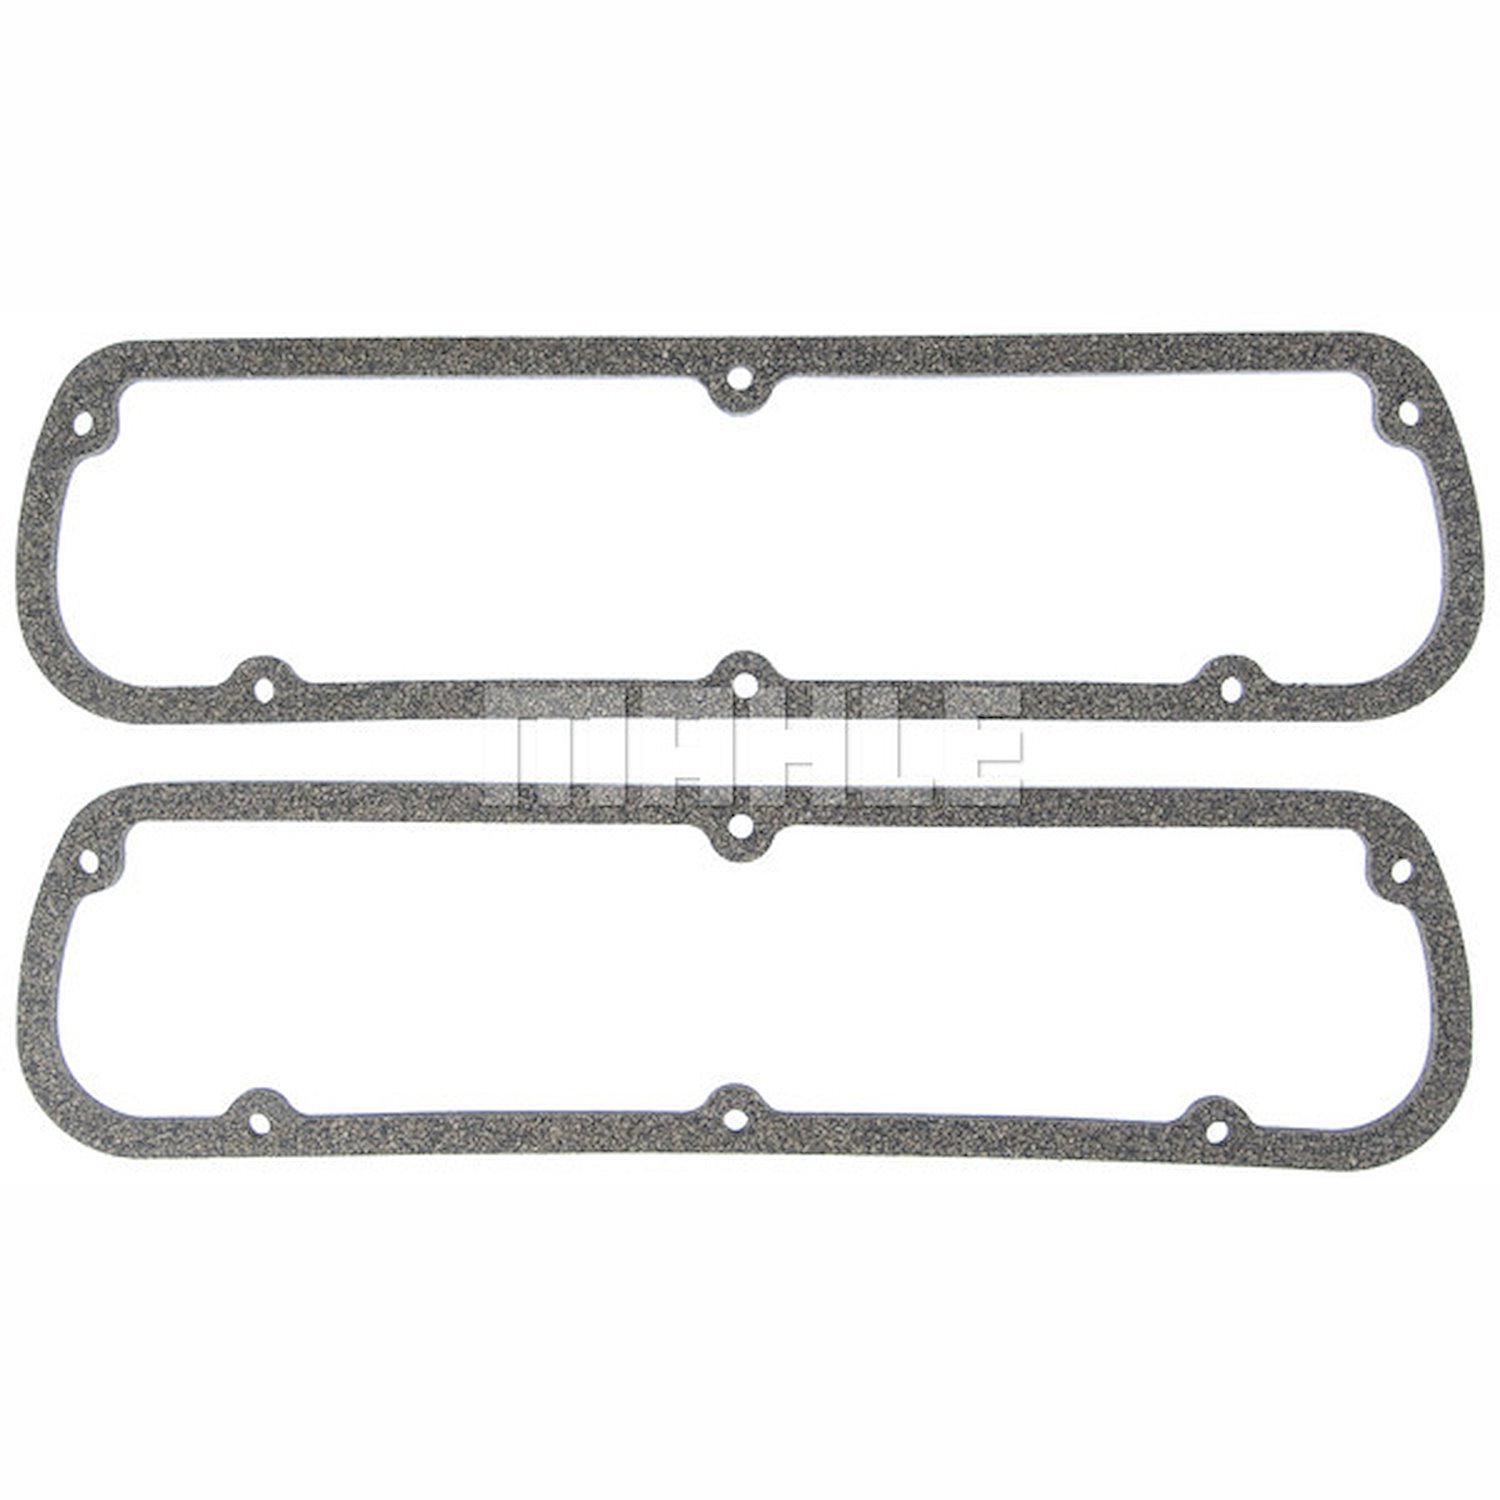 Valve Cover Gasket Set for Small Block Ford 289-351W